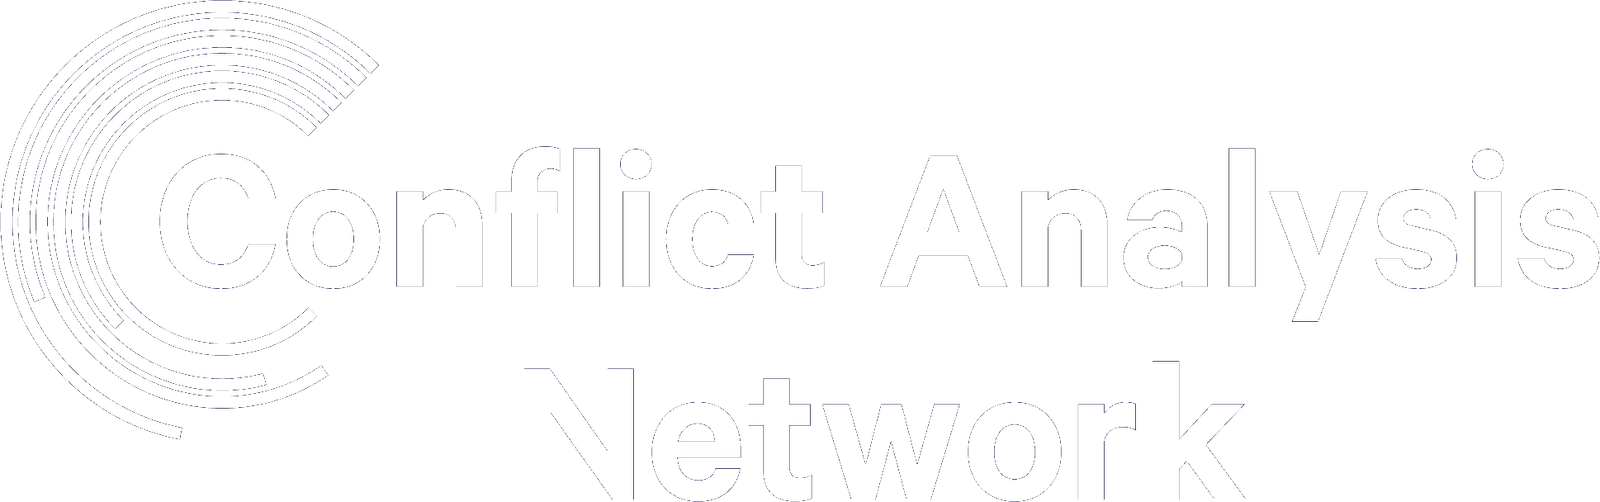 Conflict Analysis Network